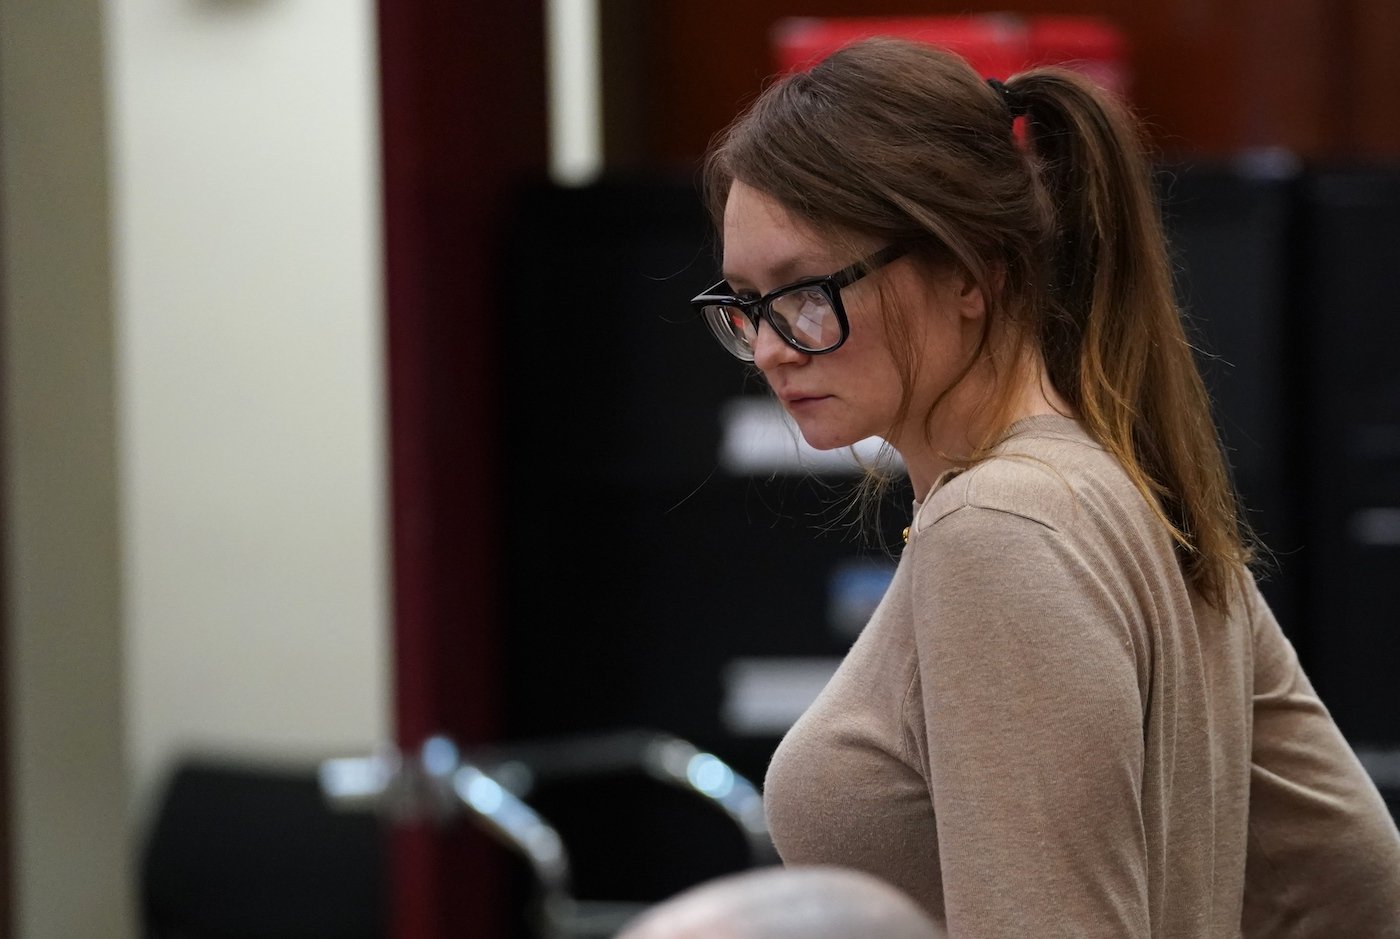 Anna Delvey, known as Anna Sorokin wears glasses and looks down while in court 